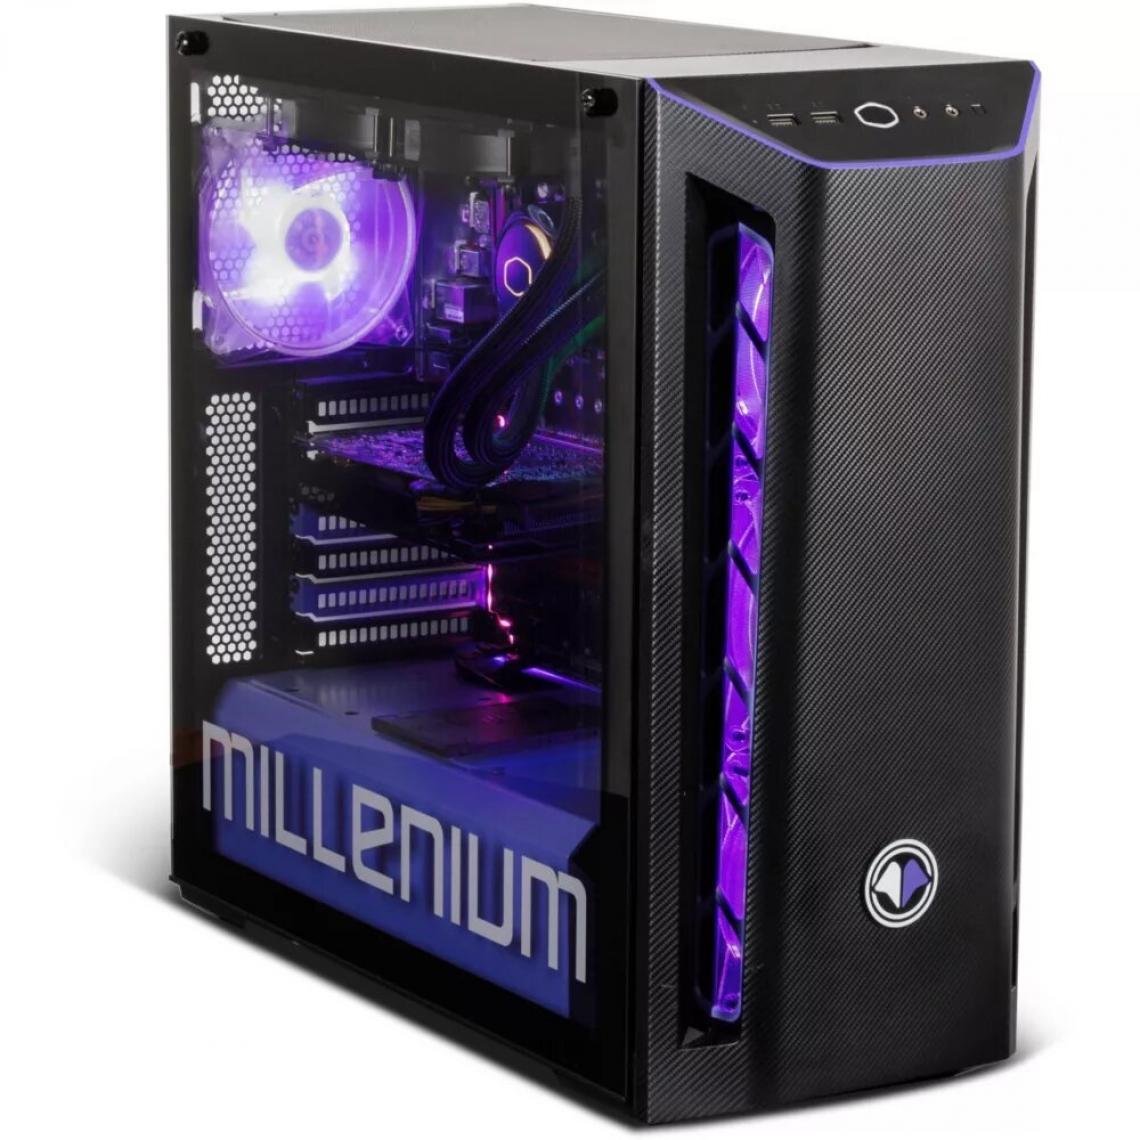 Millenium - MM1 MISS FORTUNE - PC Gamer - i5 10400F - Nvidia GeForce RTX 3070 - RAM 16 Go DDR4 - 1 To + SSD 240 Go - Noir - PC Fixe Gamer